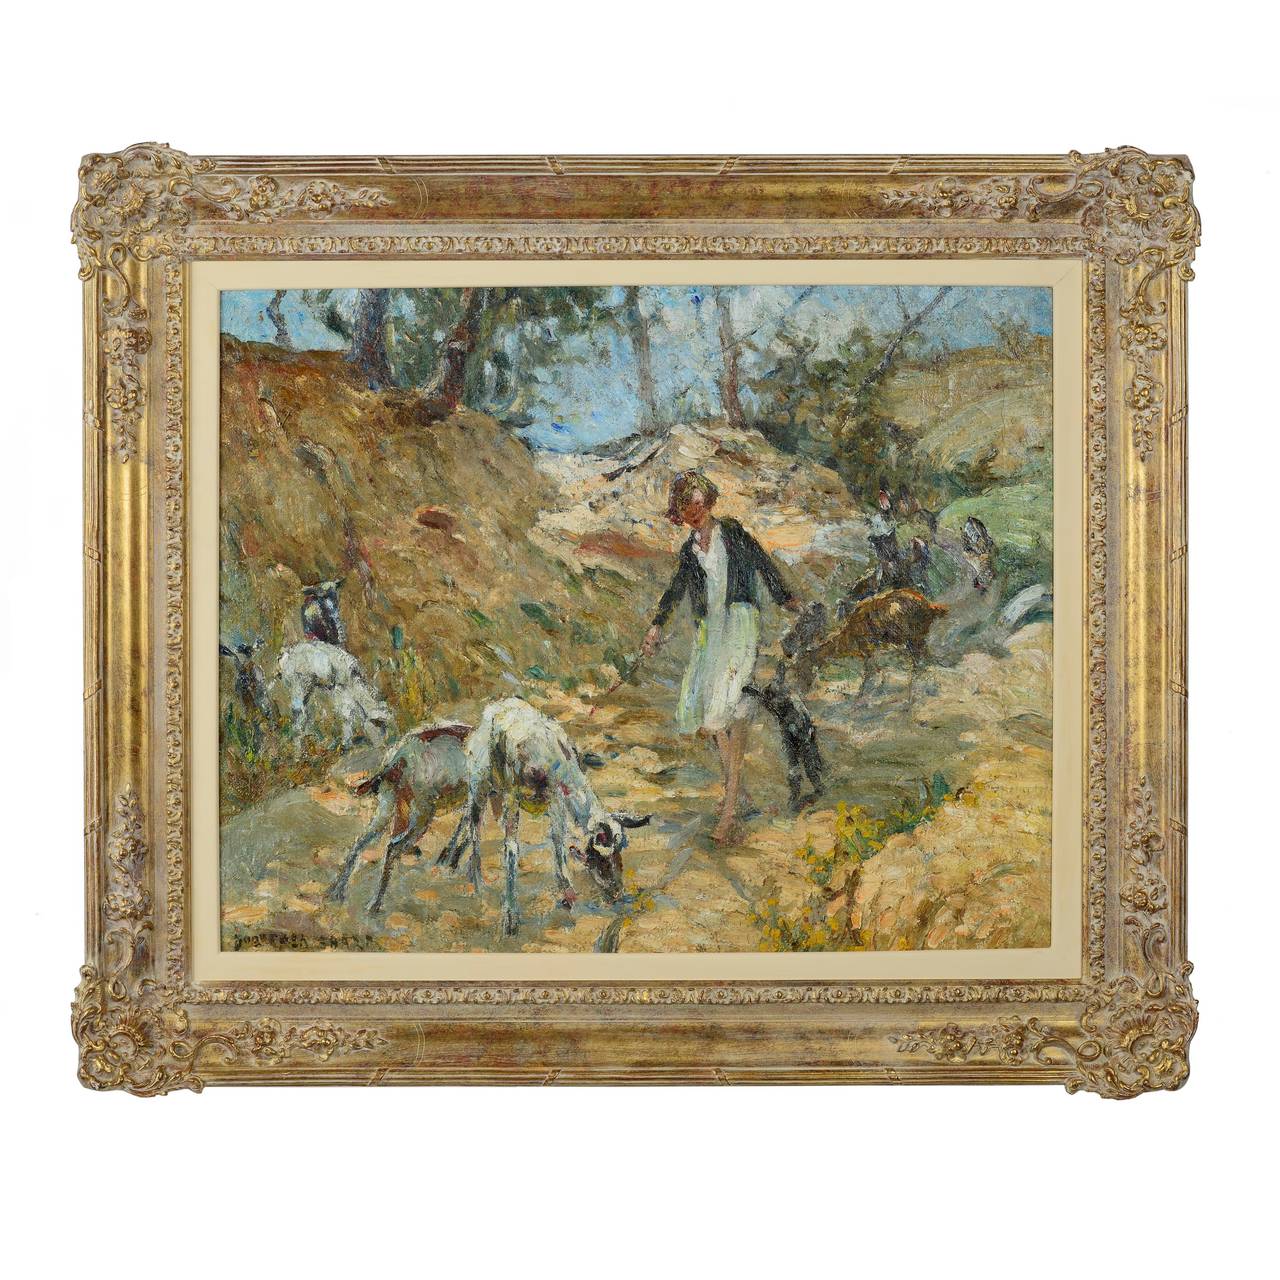 “The Young Goatherd” - Painting by Dorothea Sharp